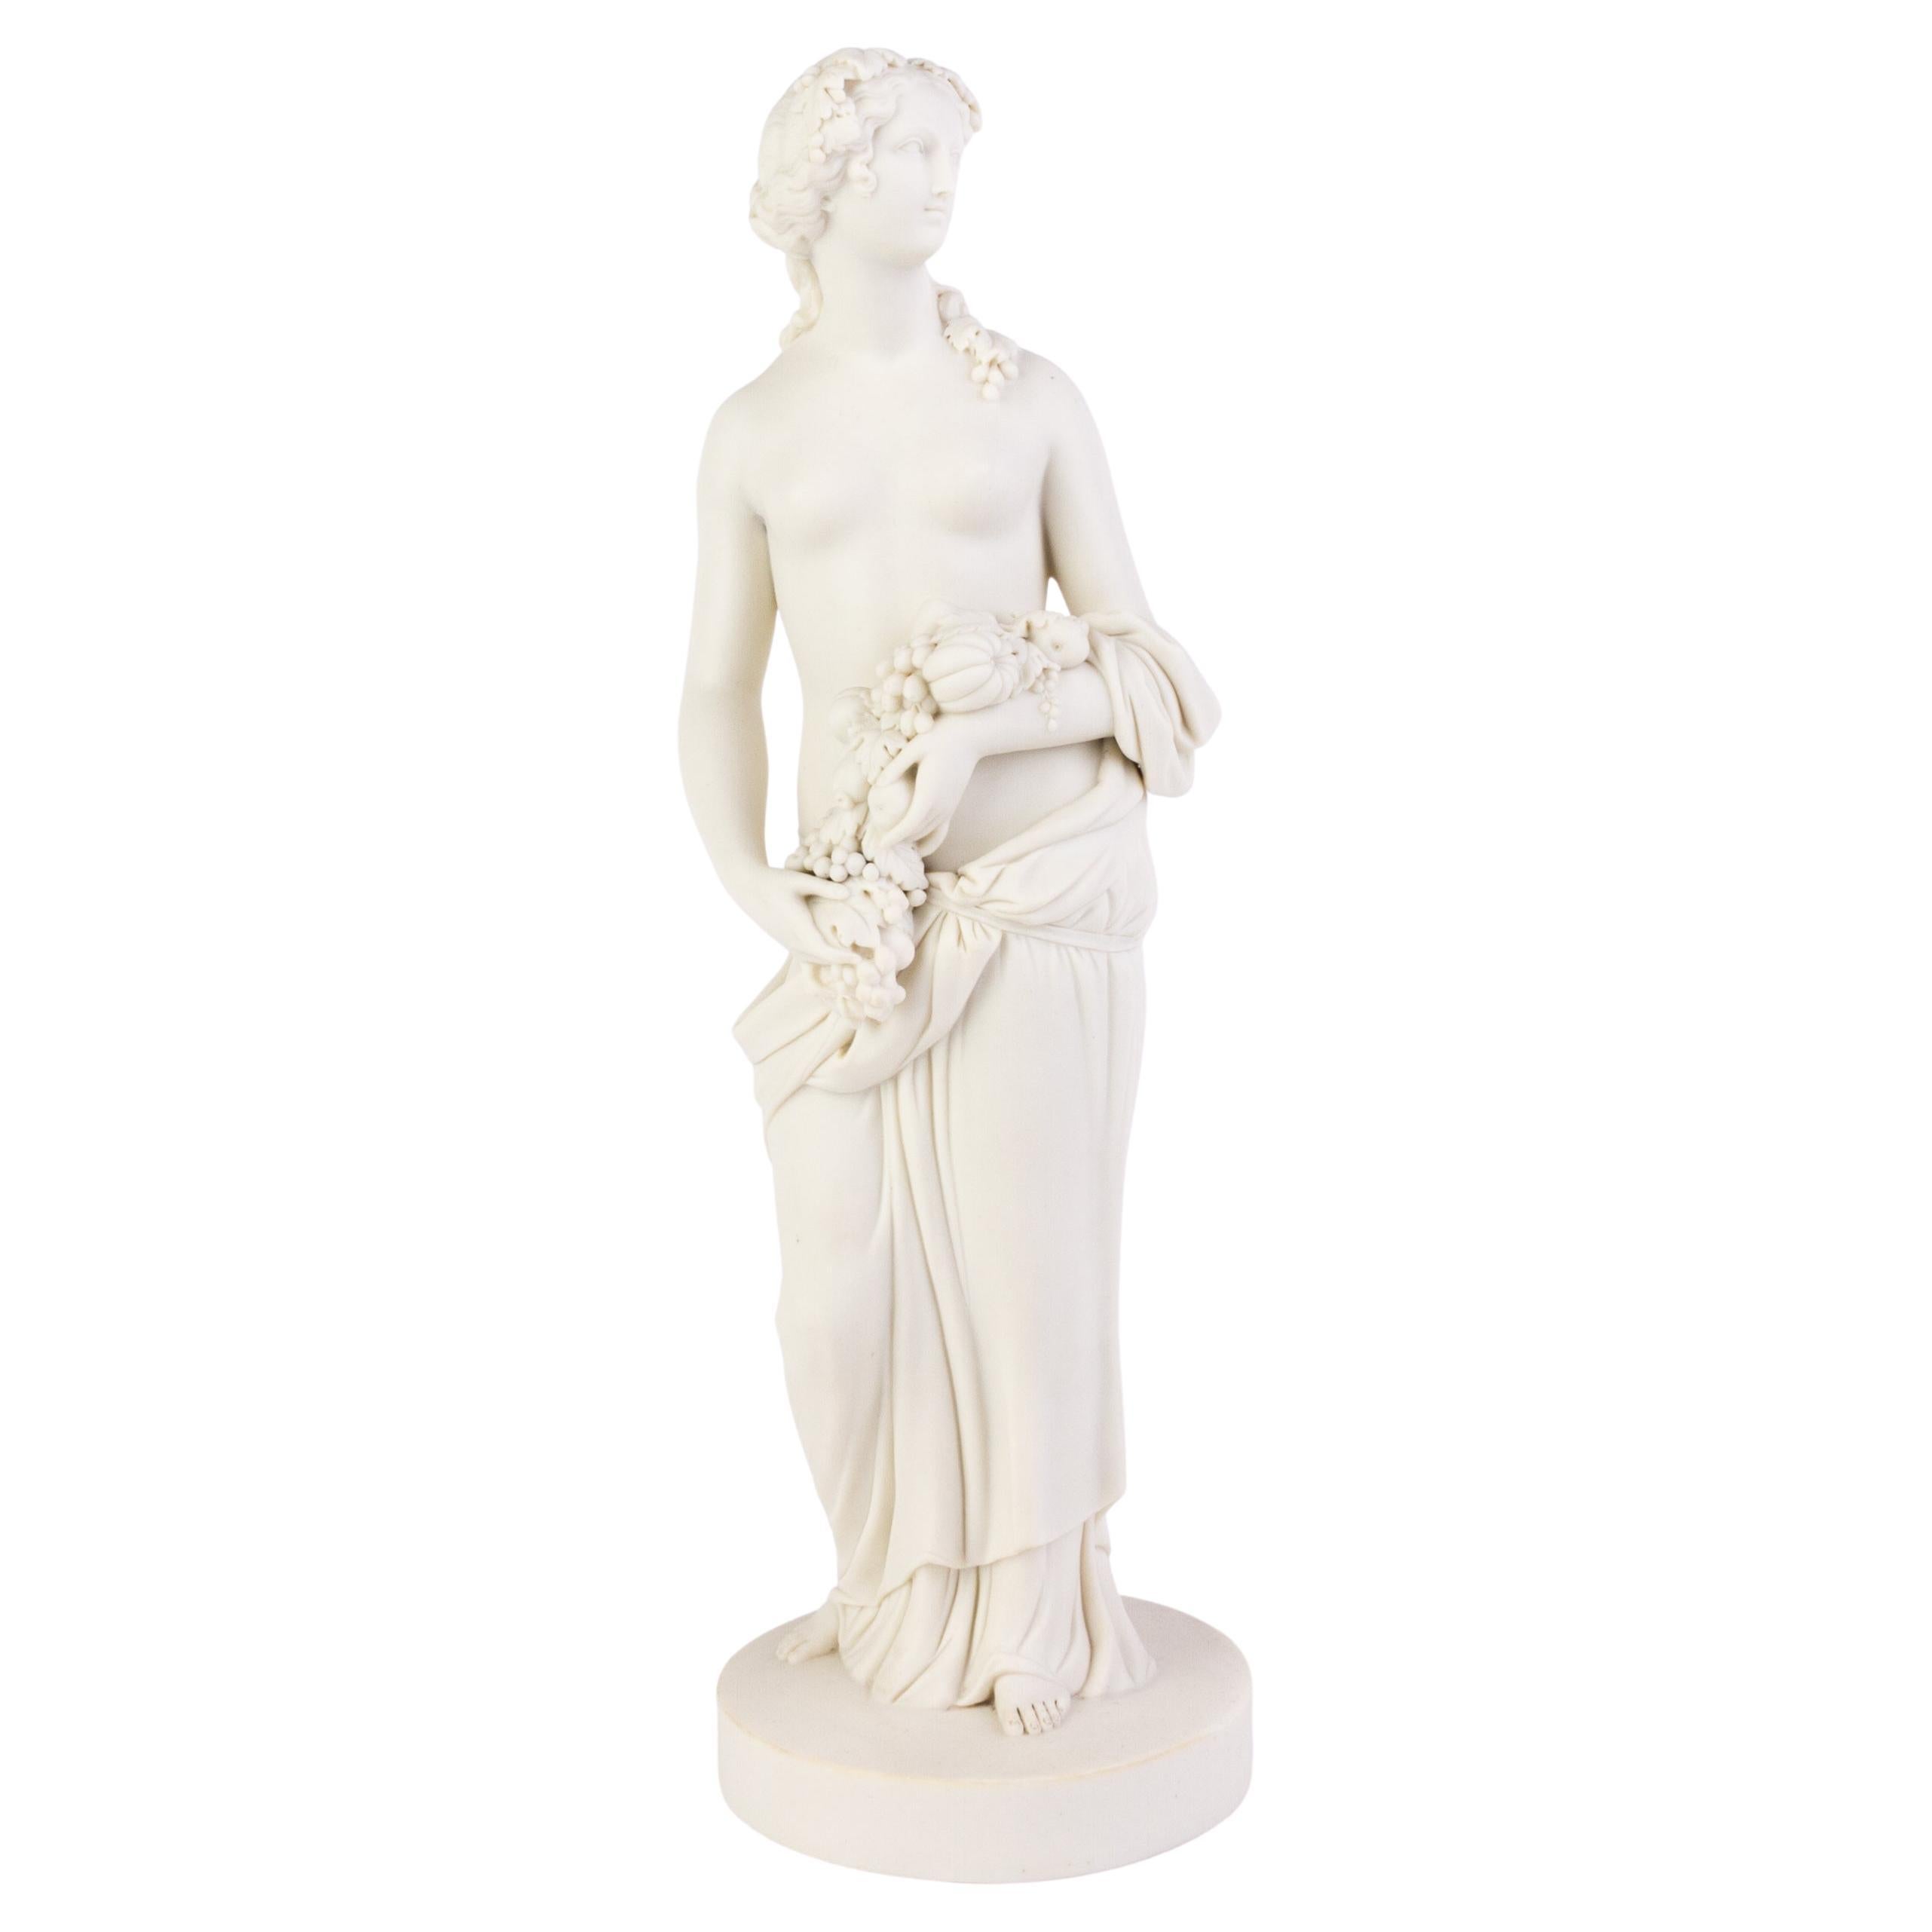 English Victorian Copeland Parian Ware Statue of Spring 19th Century For Sale